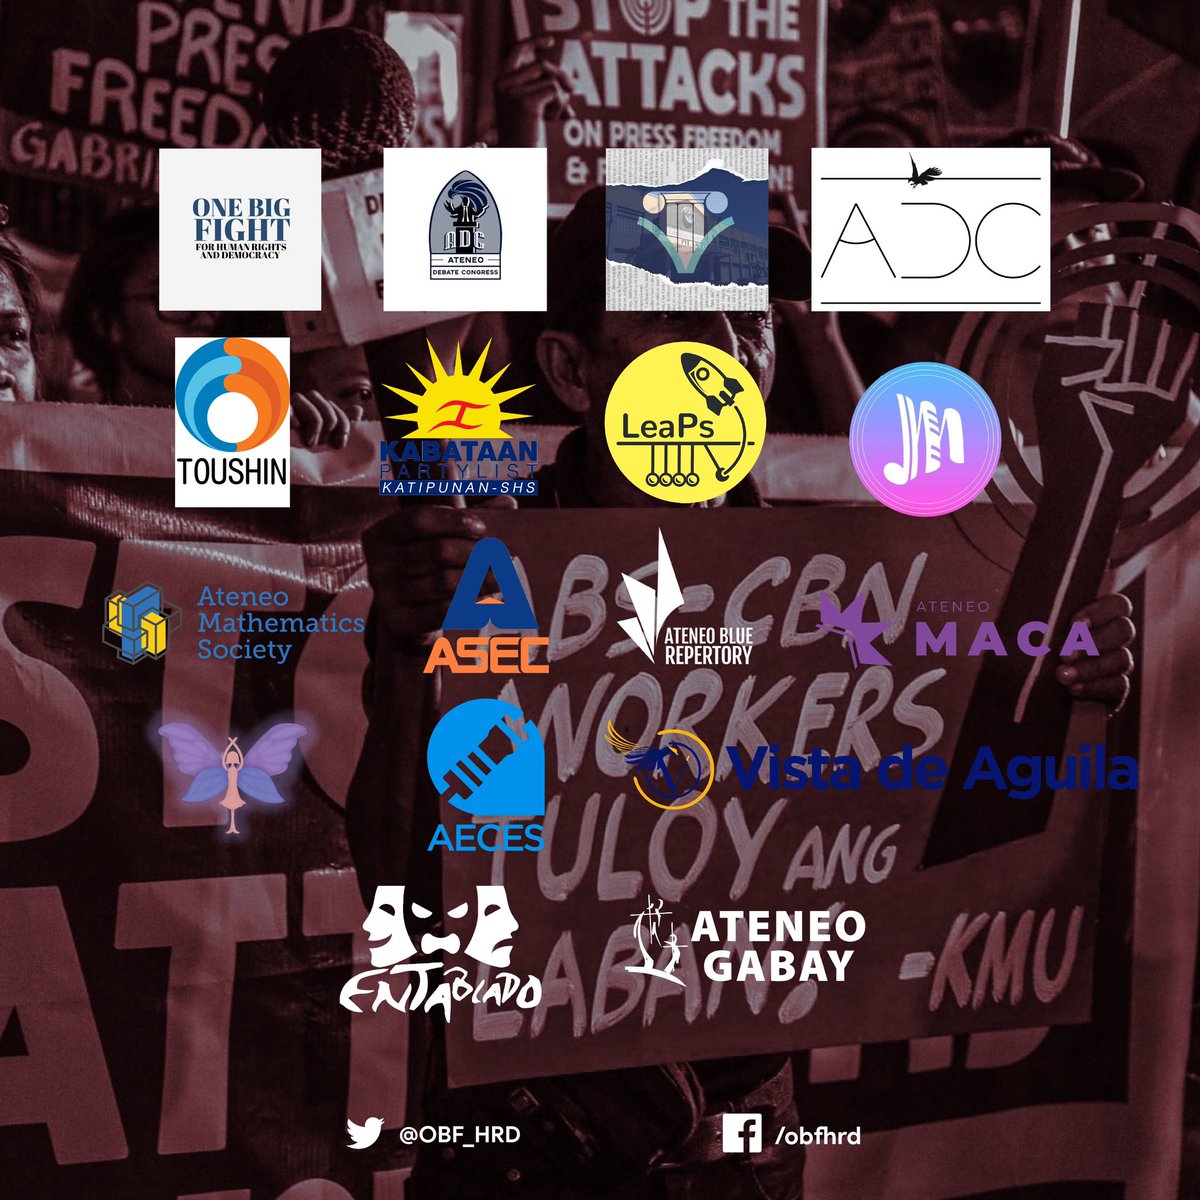 The joint unity statement of the OBFHRD along with student organizations regarding HOR’s rejection of broadcasting network ABS-CBN’s franchise renewal. 

#NOToABSCBNFranchiseDenial #DefendPressFreedom

FULL STATEMENT: facebook.com/72688803771211…